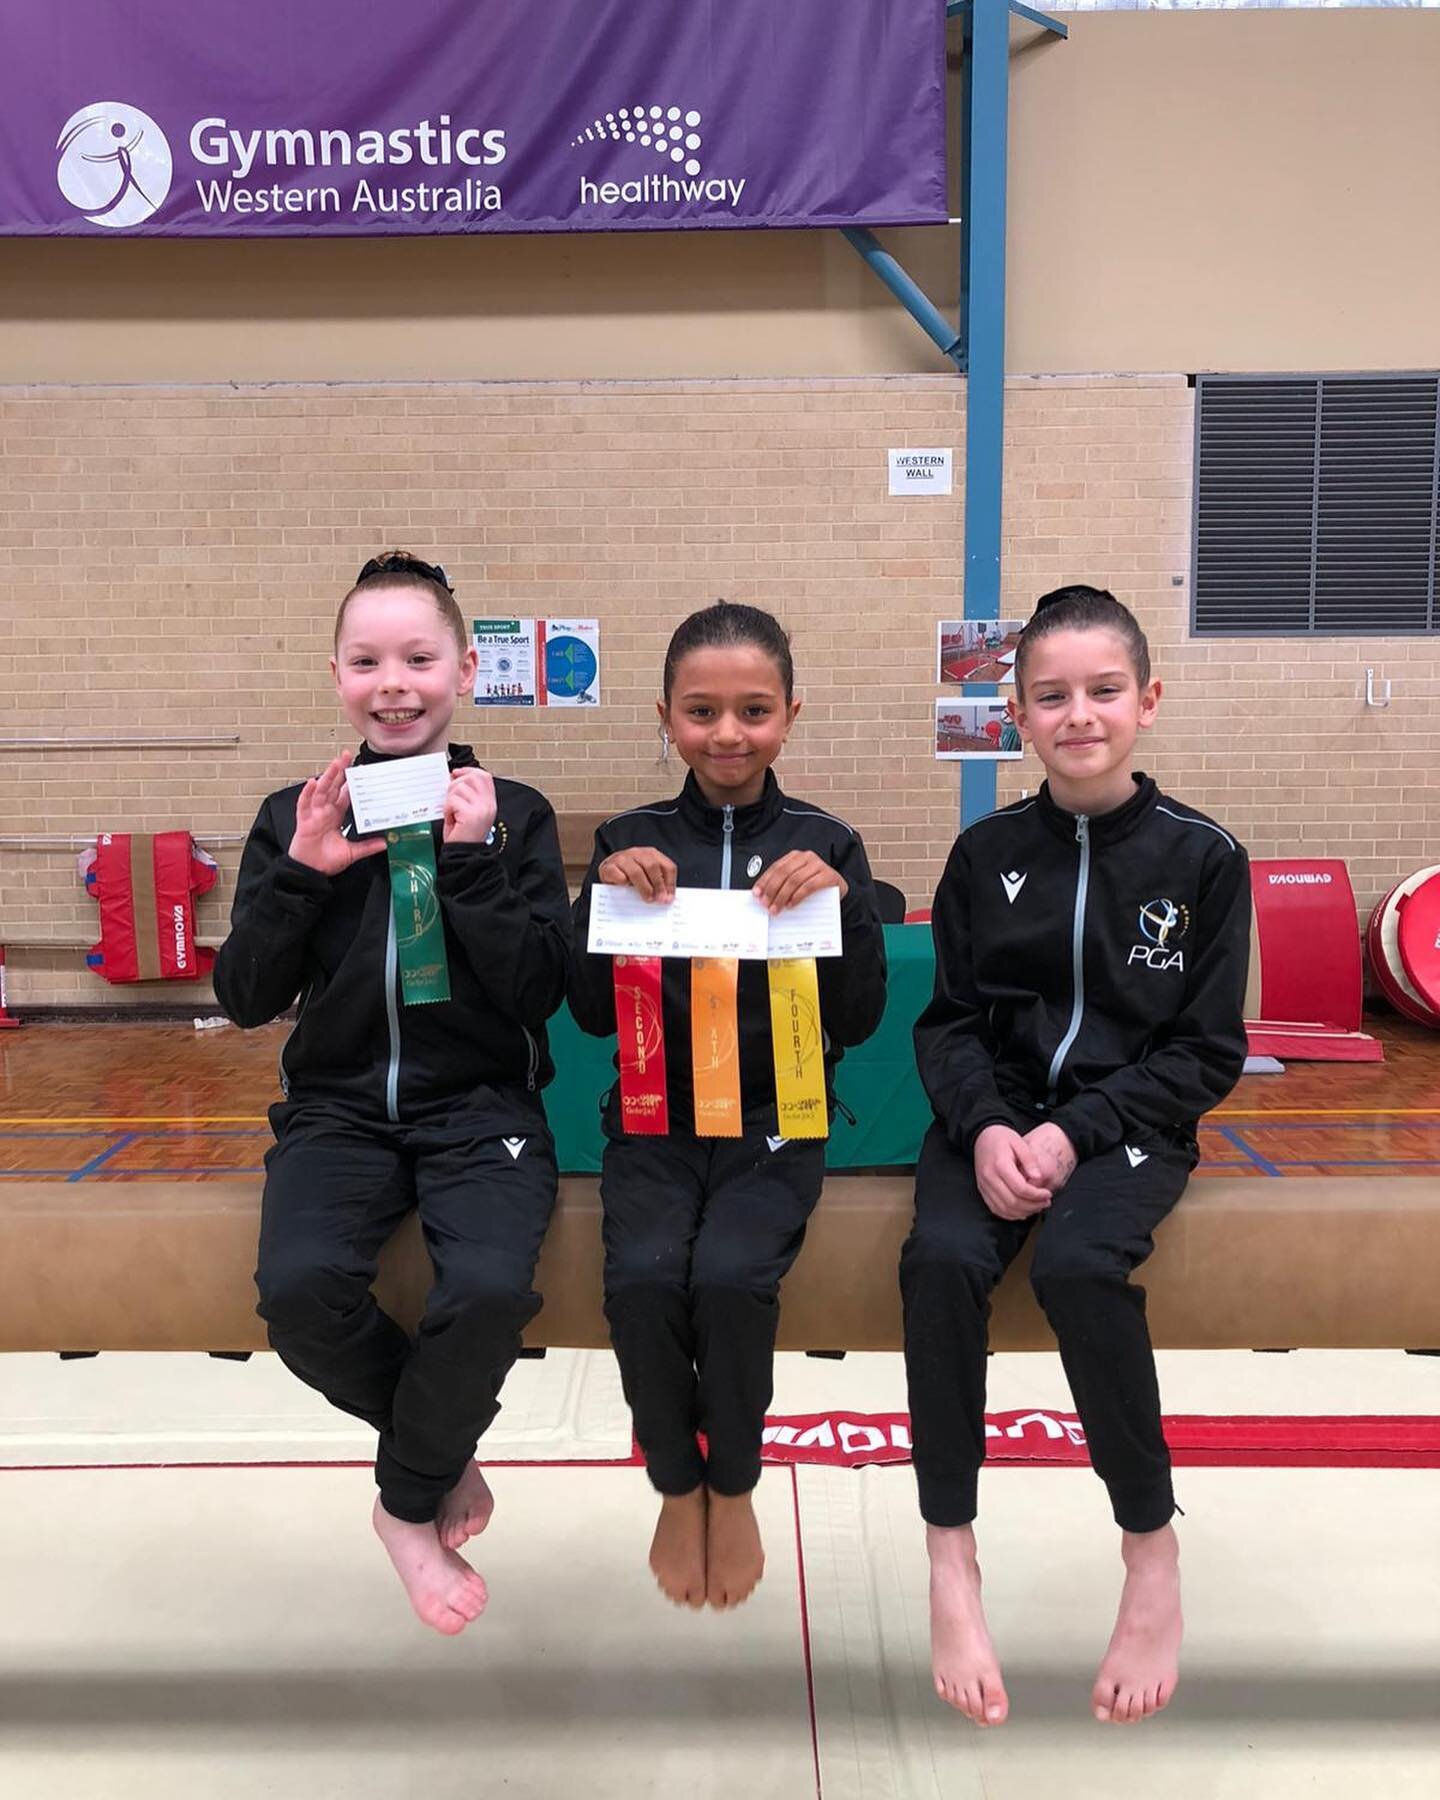 Congratulations to the PGA Level 4 gymnasts Annalisa, Saskia and Kayla  who competed in WAG Series # 4 on Saturday 20th August. 

We are extremely proud of you all! 

Special mention to the below

- Kayla: 3rd Vault 
- Saskia: 6th vault, 2nd beam, 4t